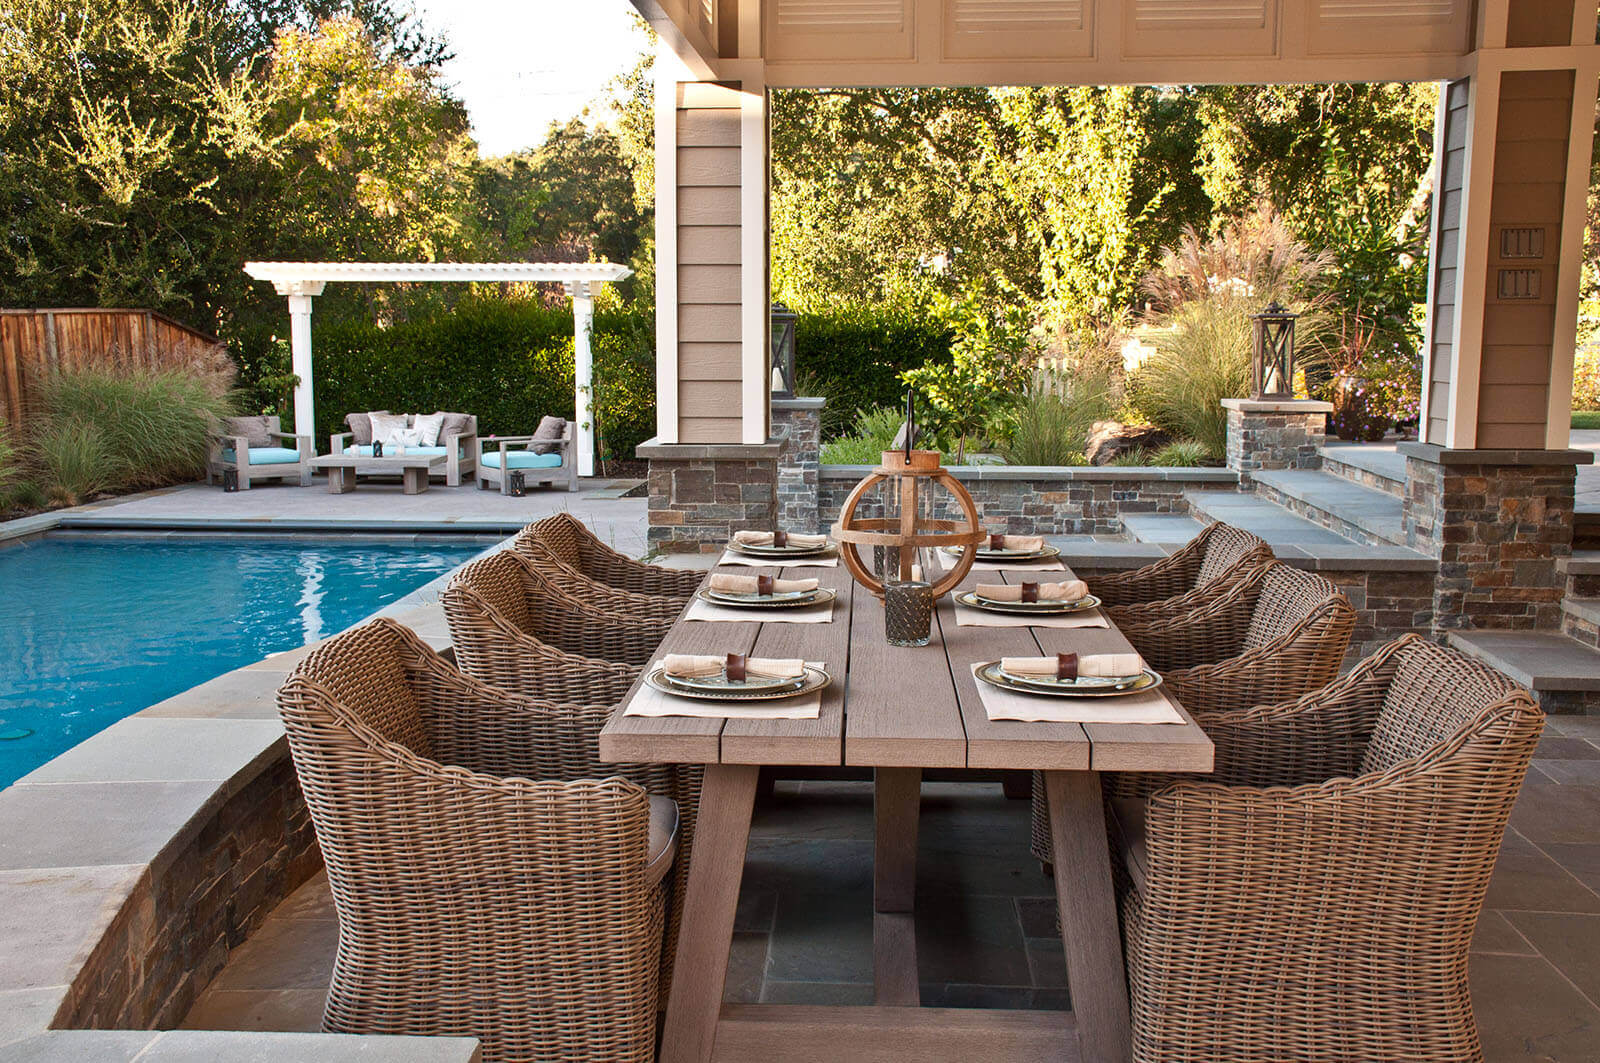 Terraced bluestone patio and outdoor dining overlooks pool and poolside seating area